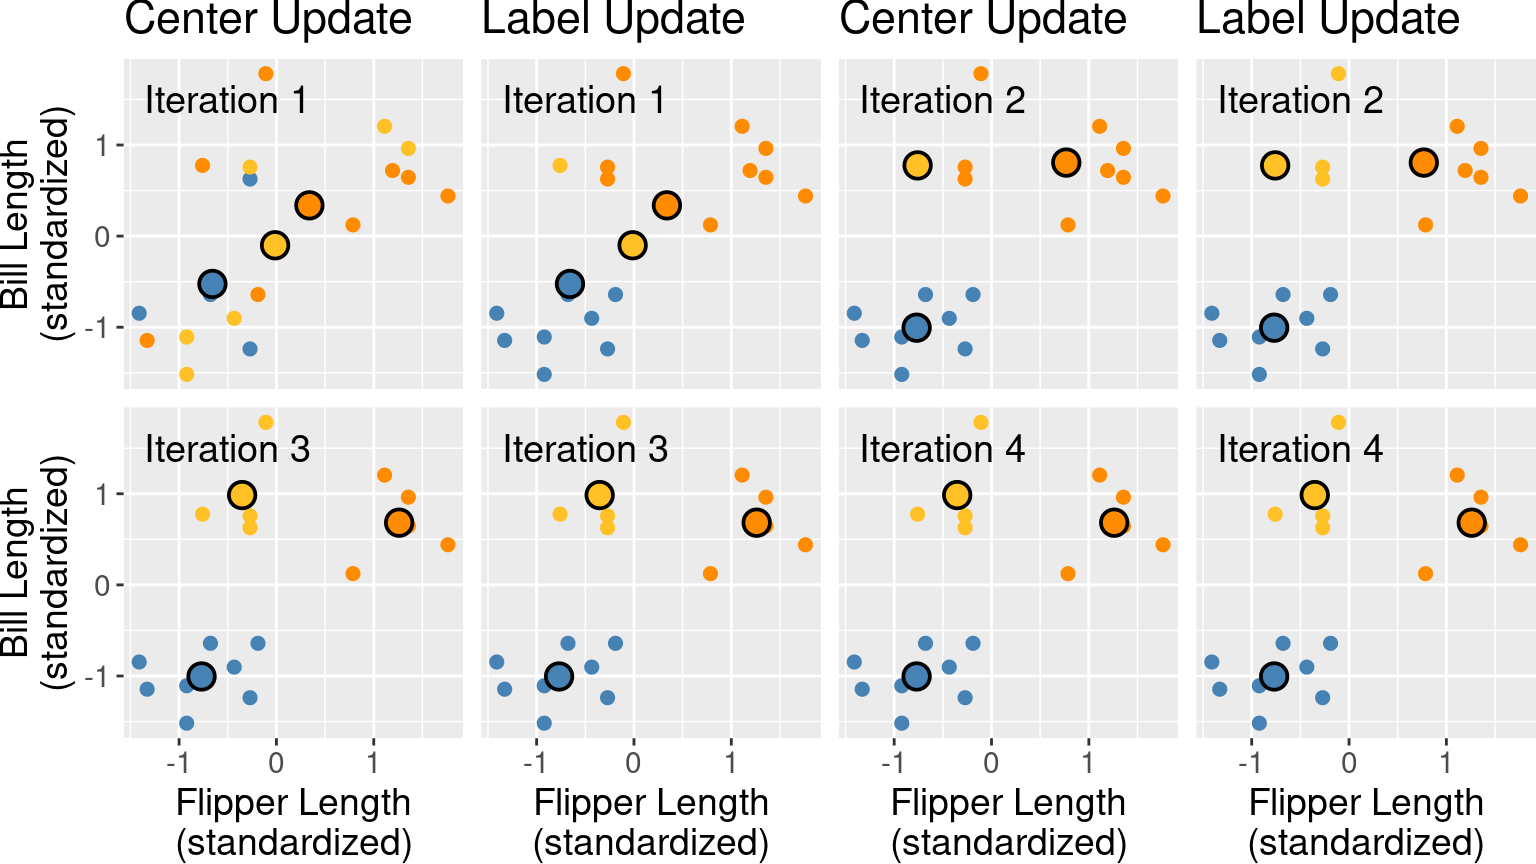 First four iterations of K-means clustering on the penguins_standardized example data set. Each pair of plots corresponds to an iteration. Within the pair, the first plot depicts the center update, and the second plot depicts the reassignment of data to clusters. Cluster centers are indicated by larger points that are outlined in black.